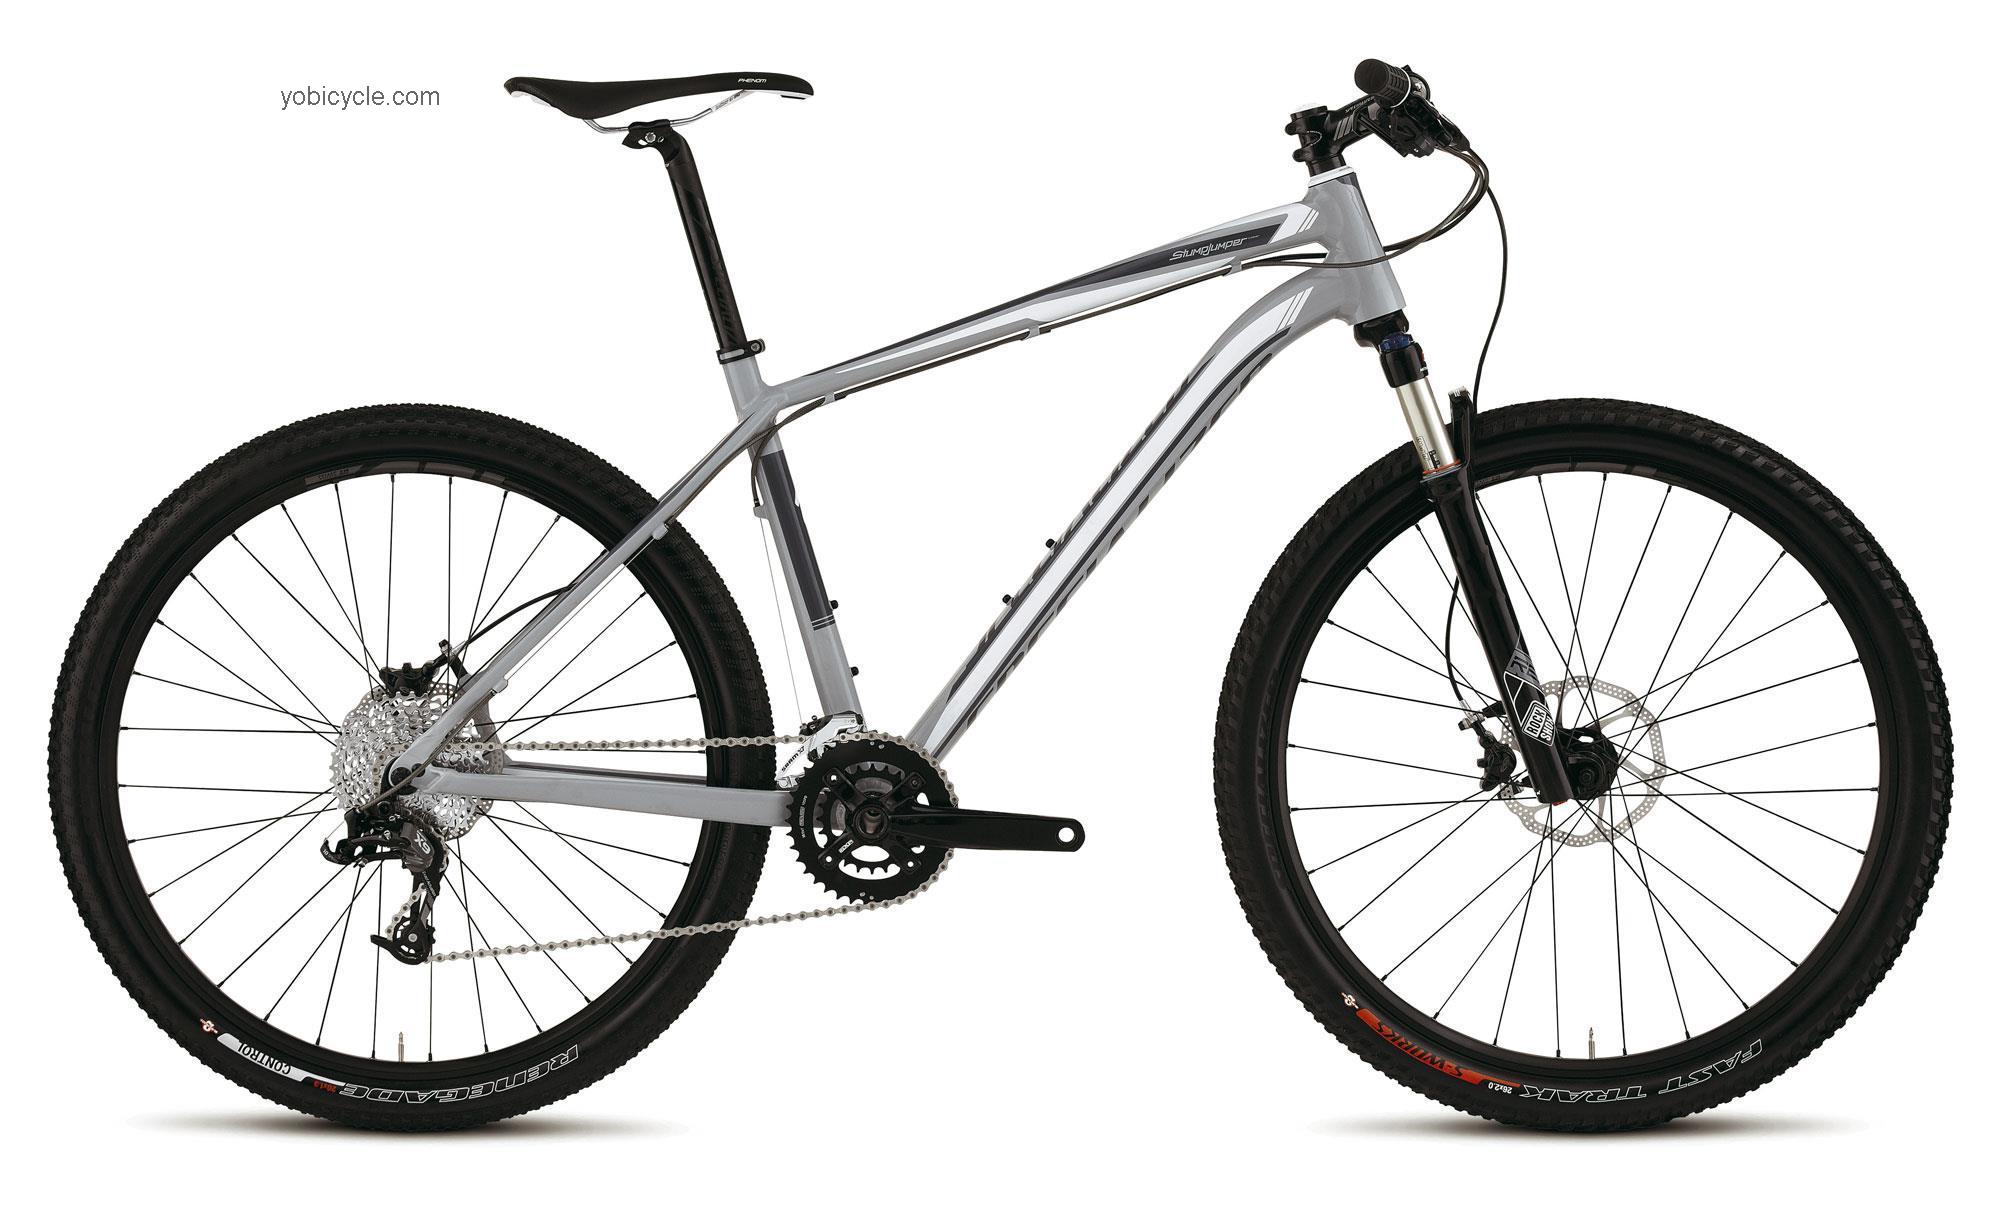 Specialized Stumpjumper HT Comp competitors and comparison tool online specs and performance